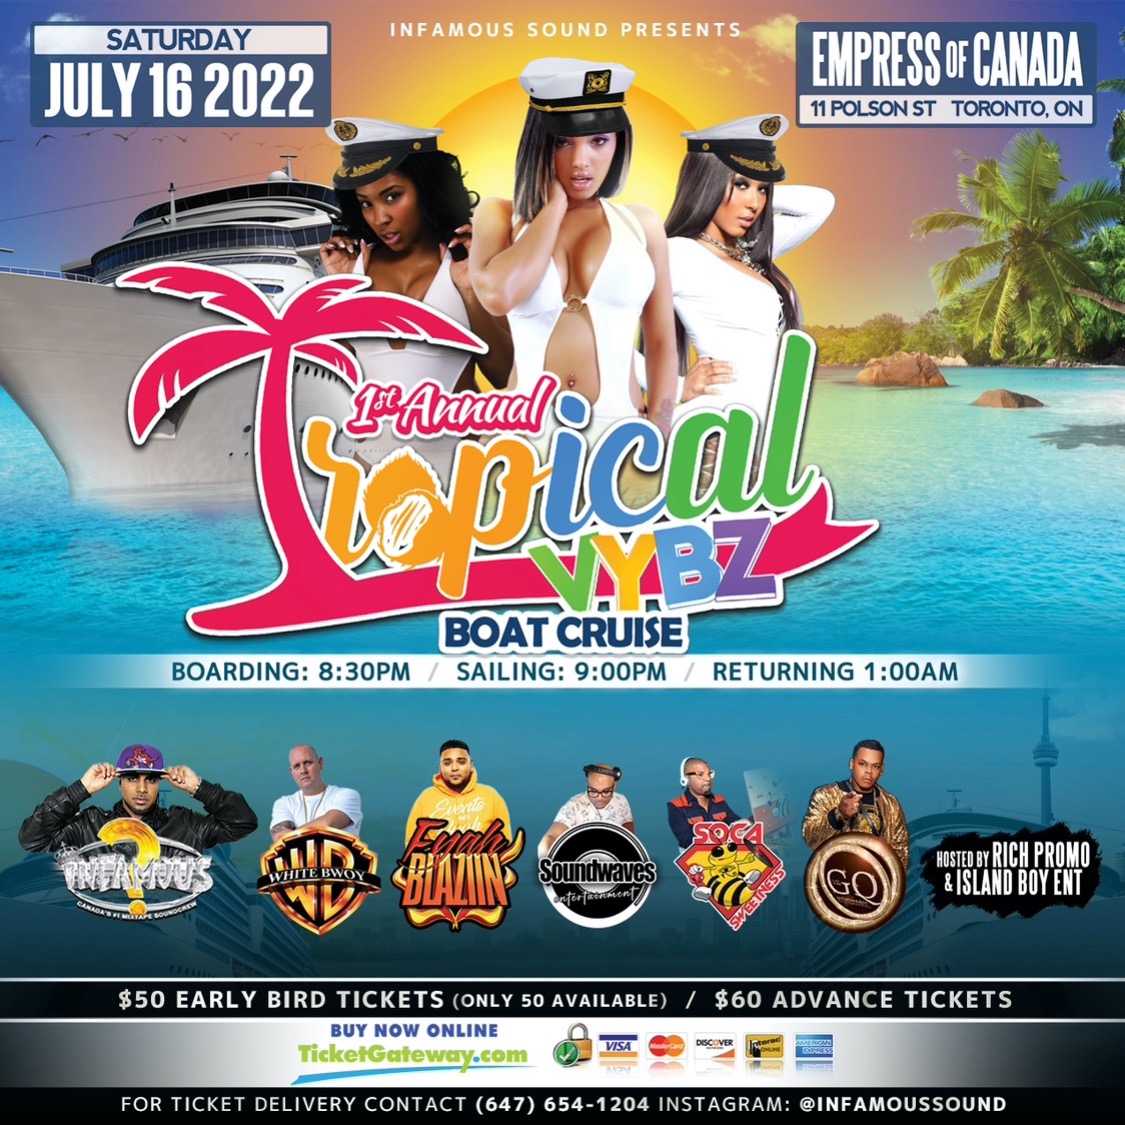 1st Annual Tropical Vybz Boat Cruise